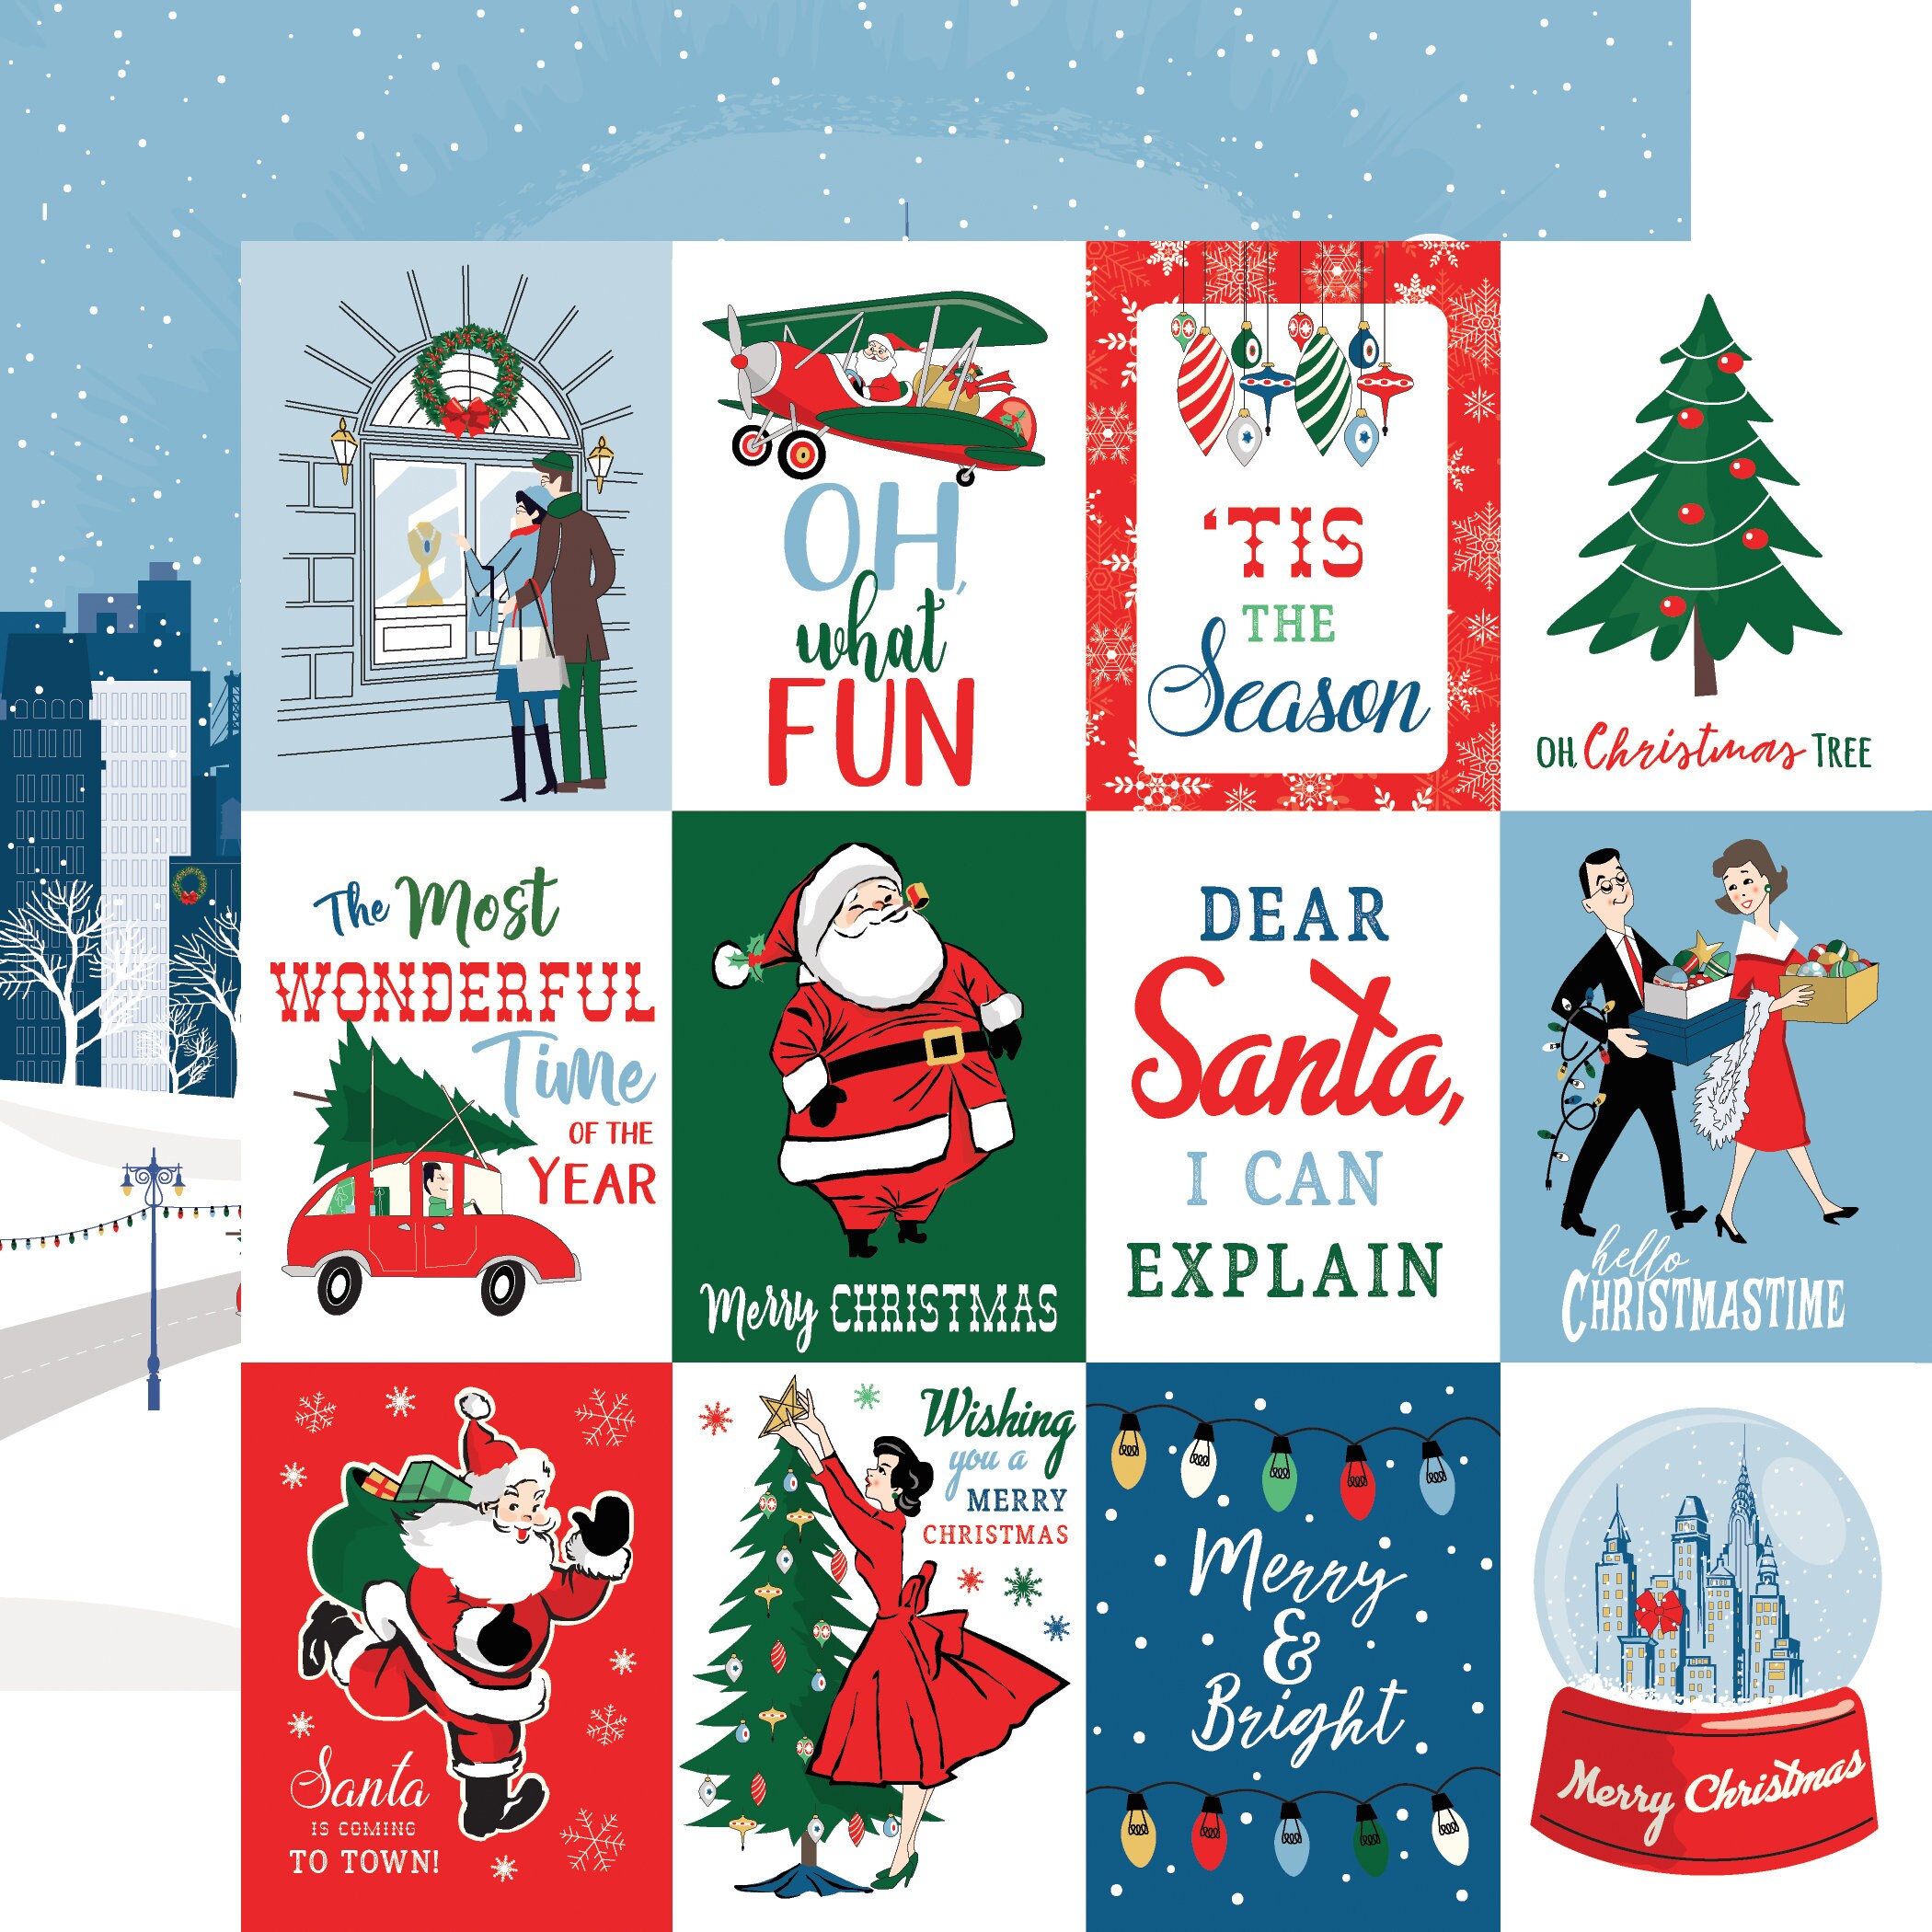 4 Assorted Sheets Carta Bella Paper Co. a Very Merry CHRISTMAS Collection,  12X12 Double-sided Sheets, Retro/vintage Christmas Papercraft 